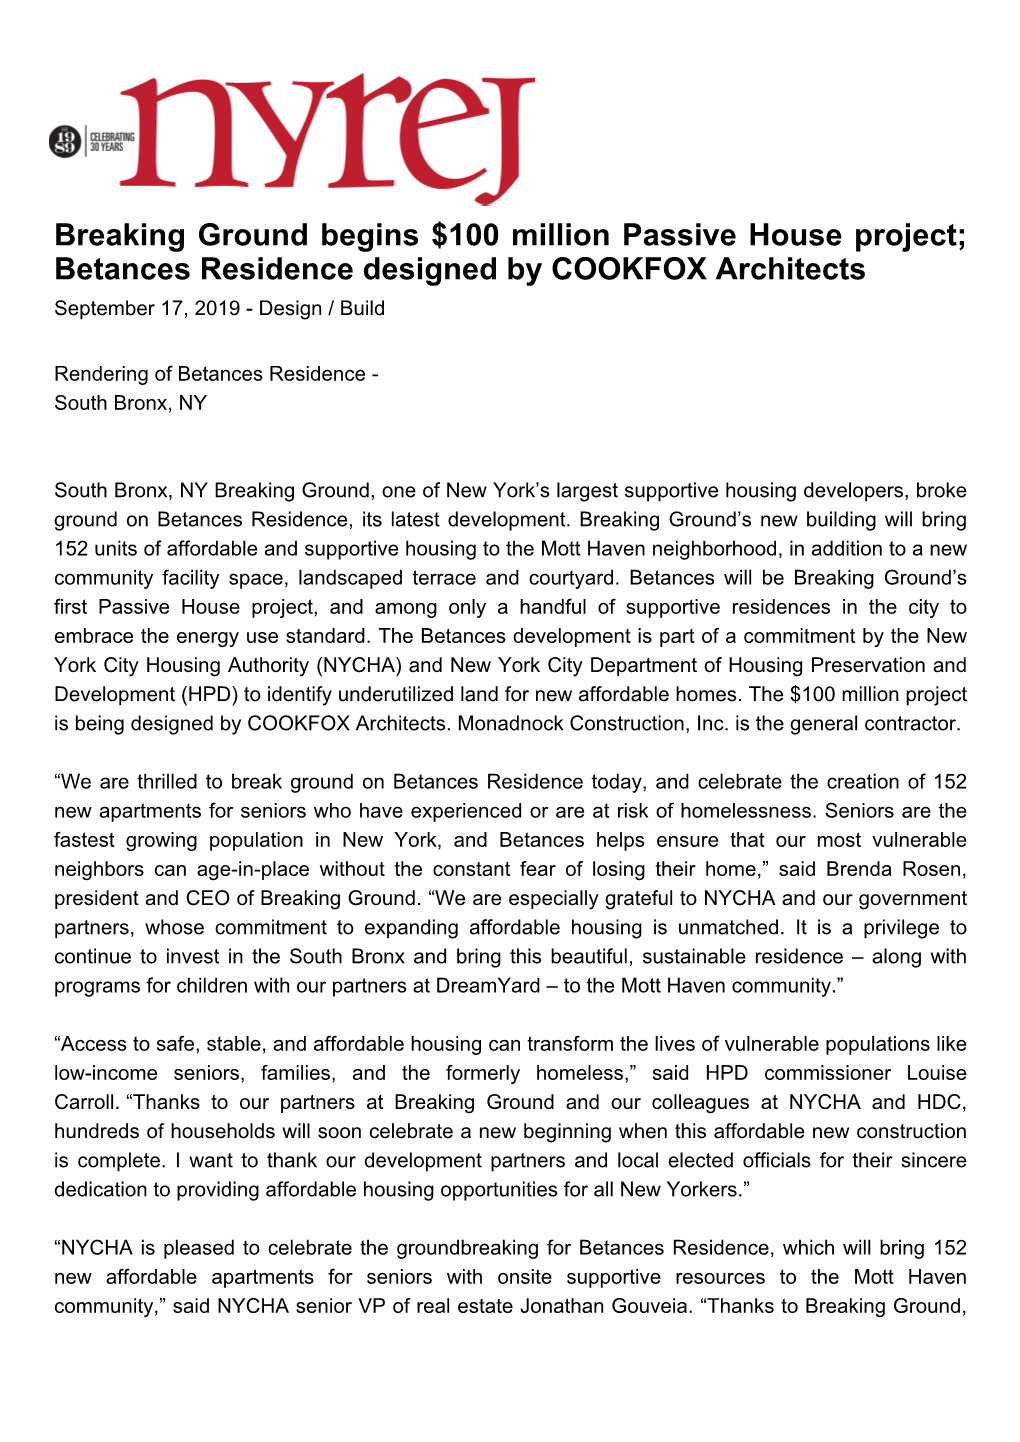 Breaking Ground Begins $100 Million Passive House Project; Betances Residence Designed by COOKFOX Architects September 17, 2019 - Design / Build